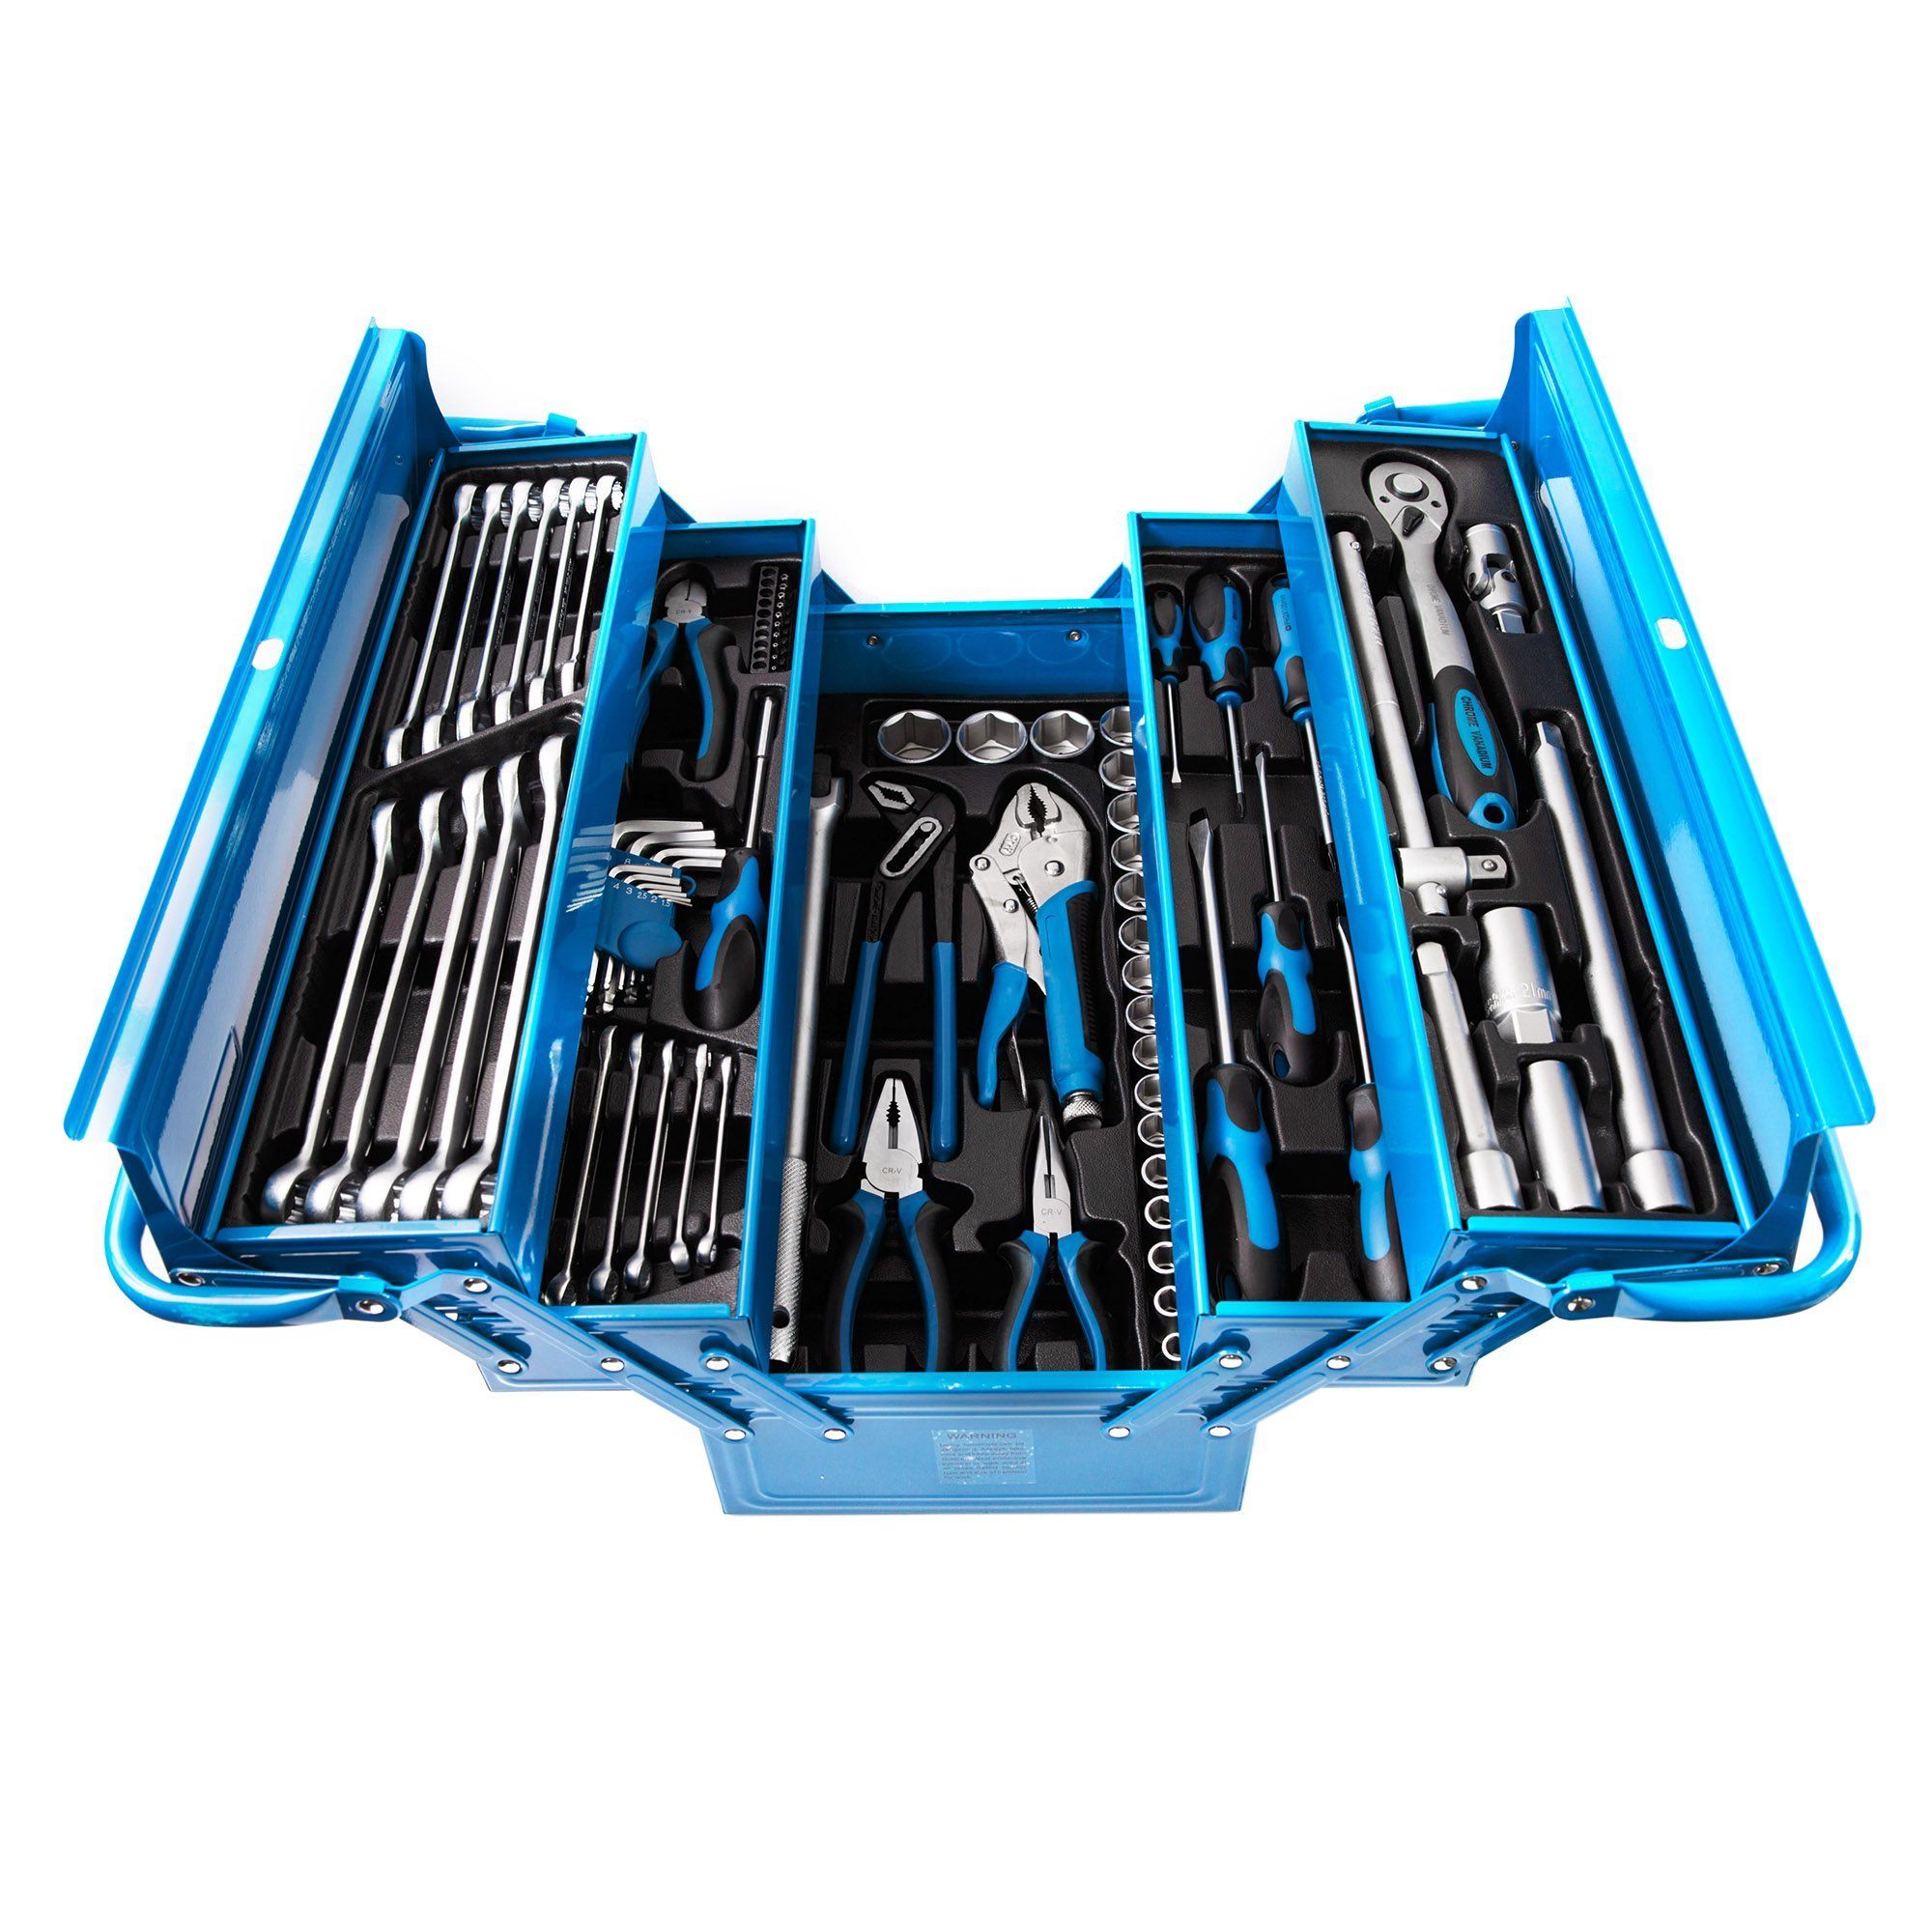 Manufactur standard Household Tool Kit - 86PCS Professional Hand Tool Set with Metal Box  – MACHINERY TOOLS